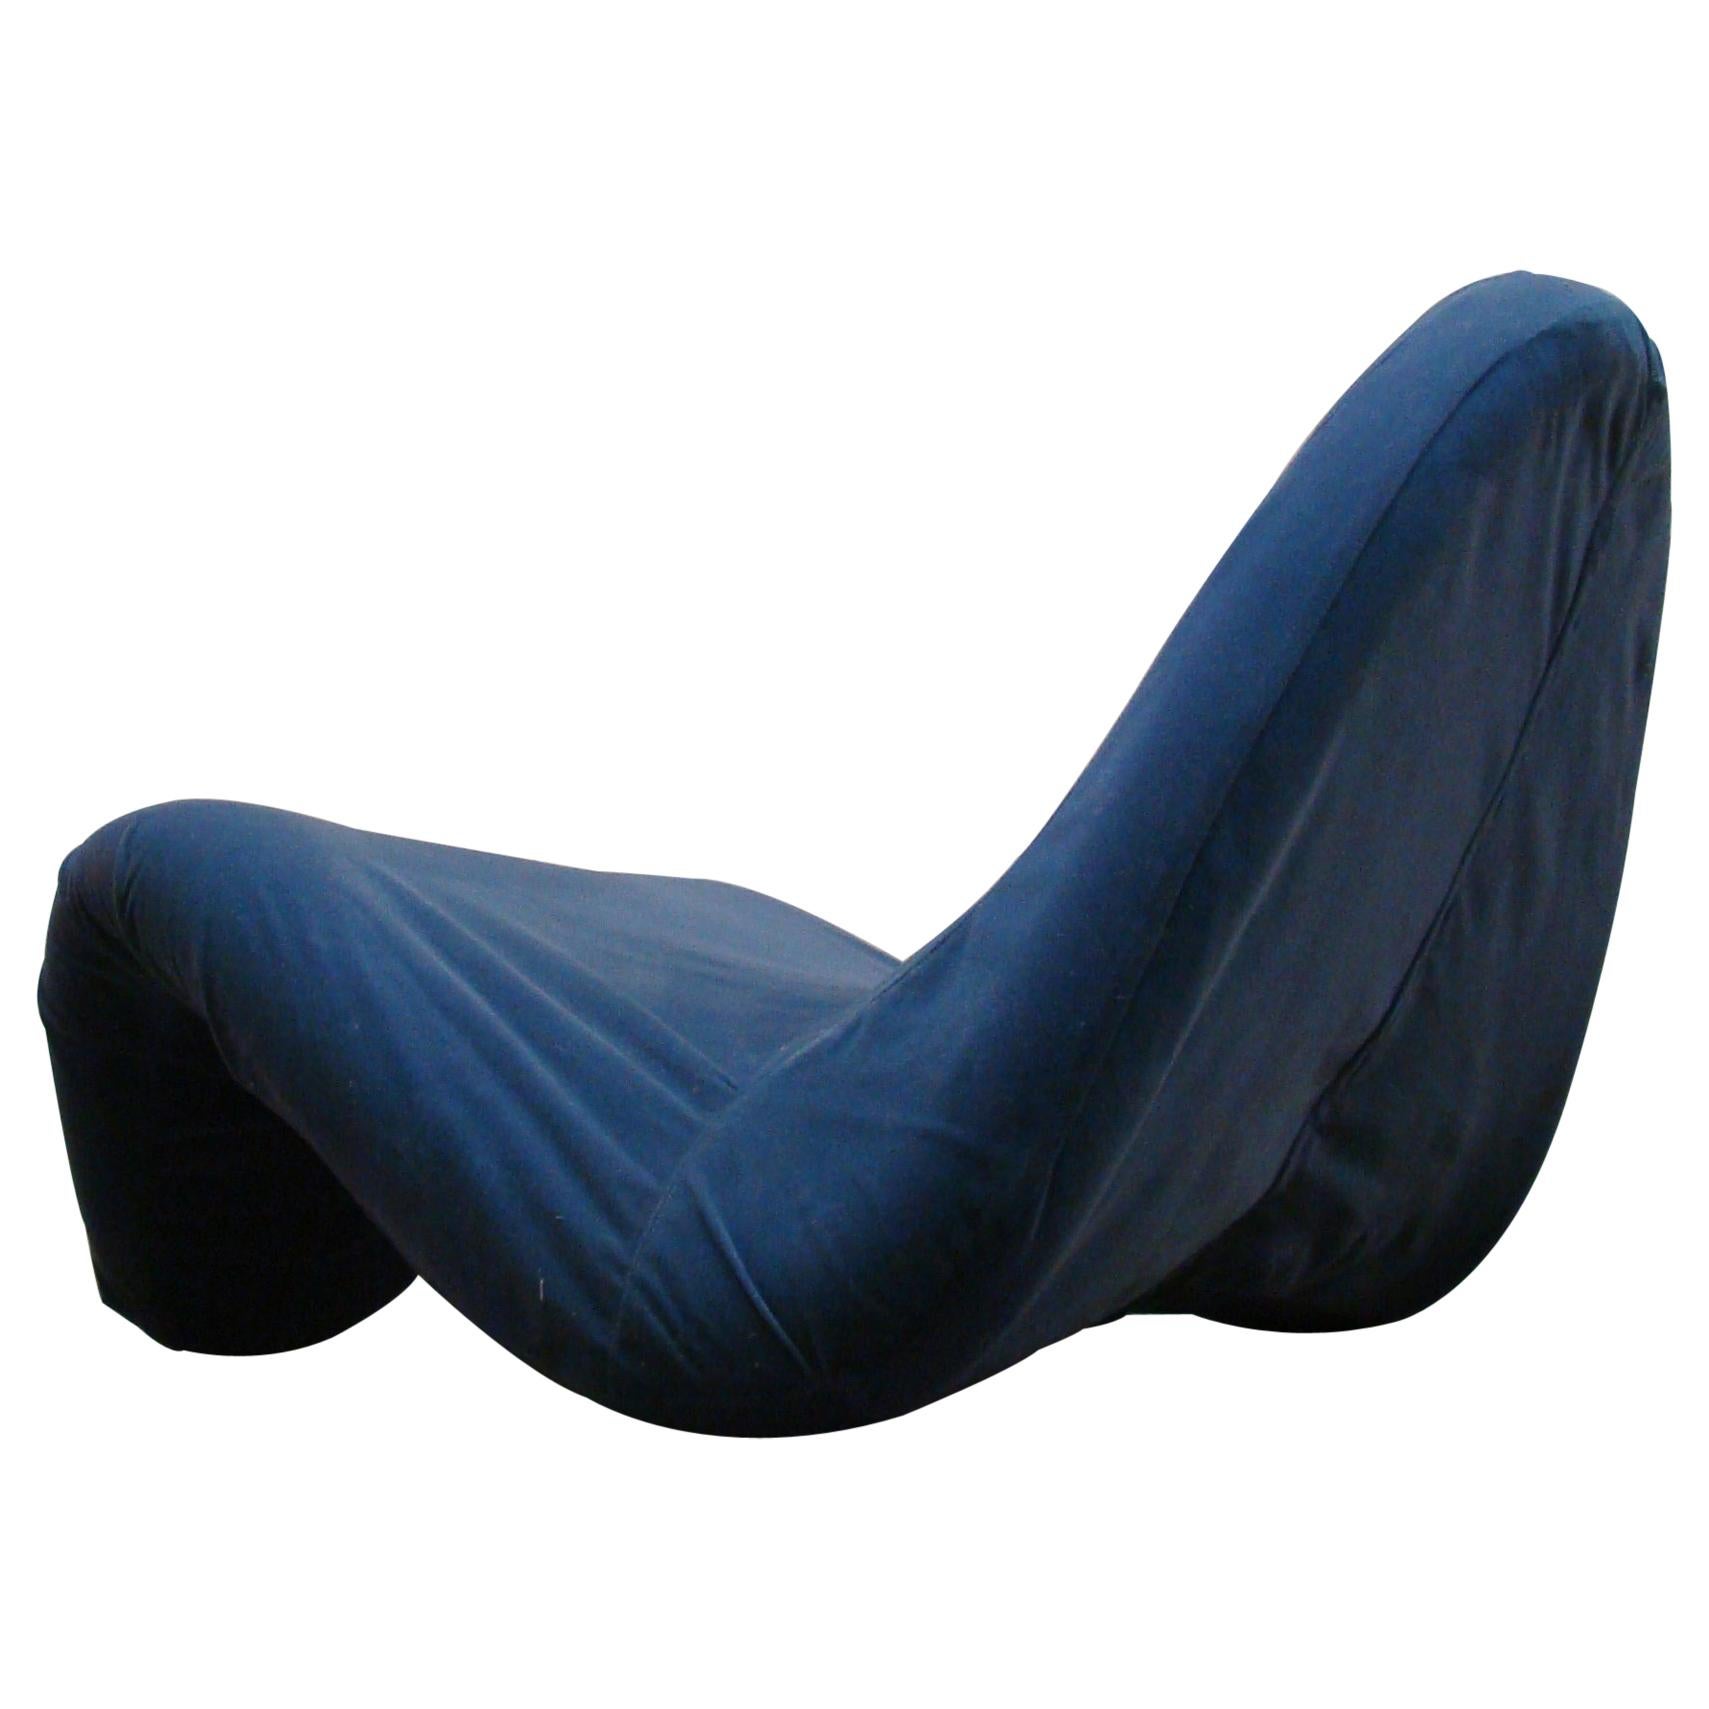 Blue 1960s Vintage Tongue Chair in the Style of Pierre Paulin For Sale